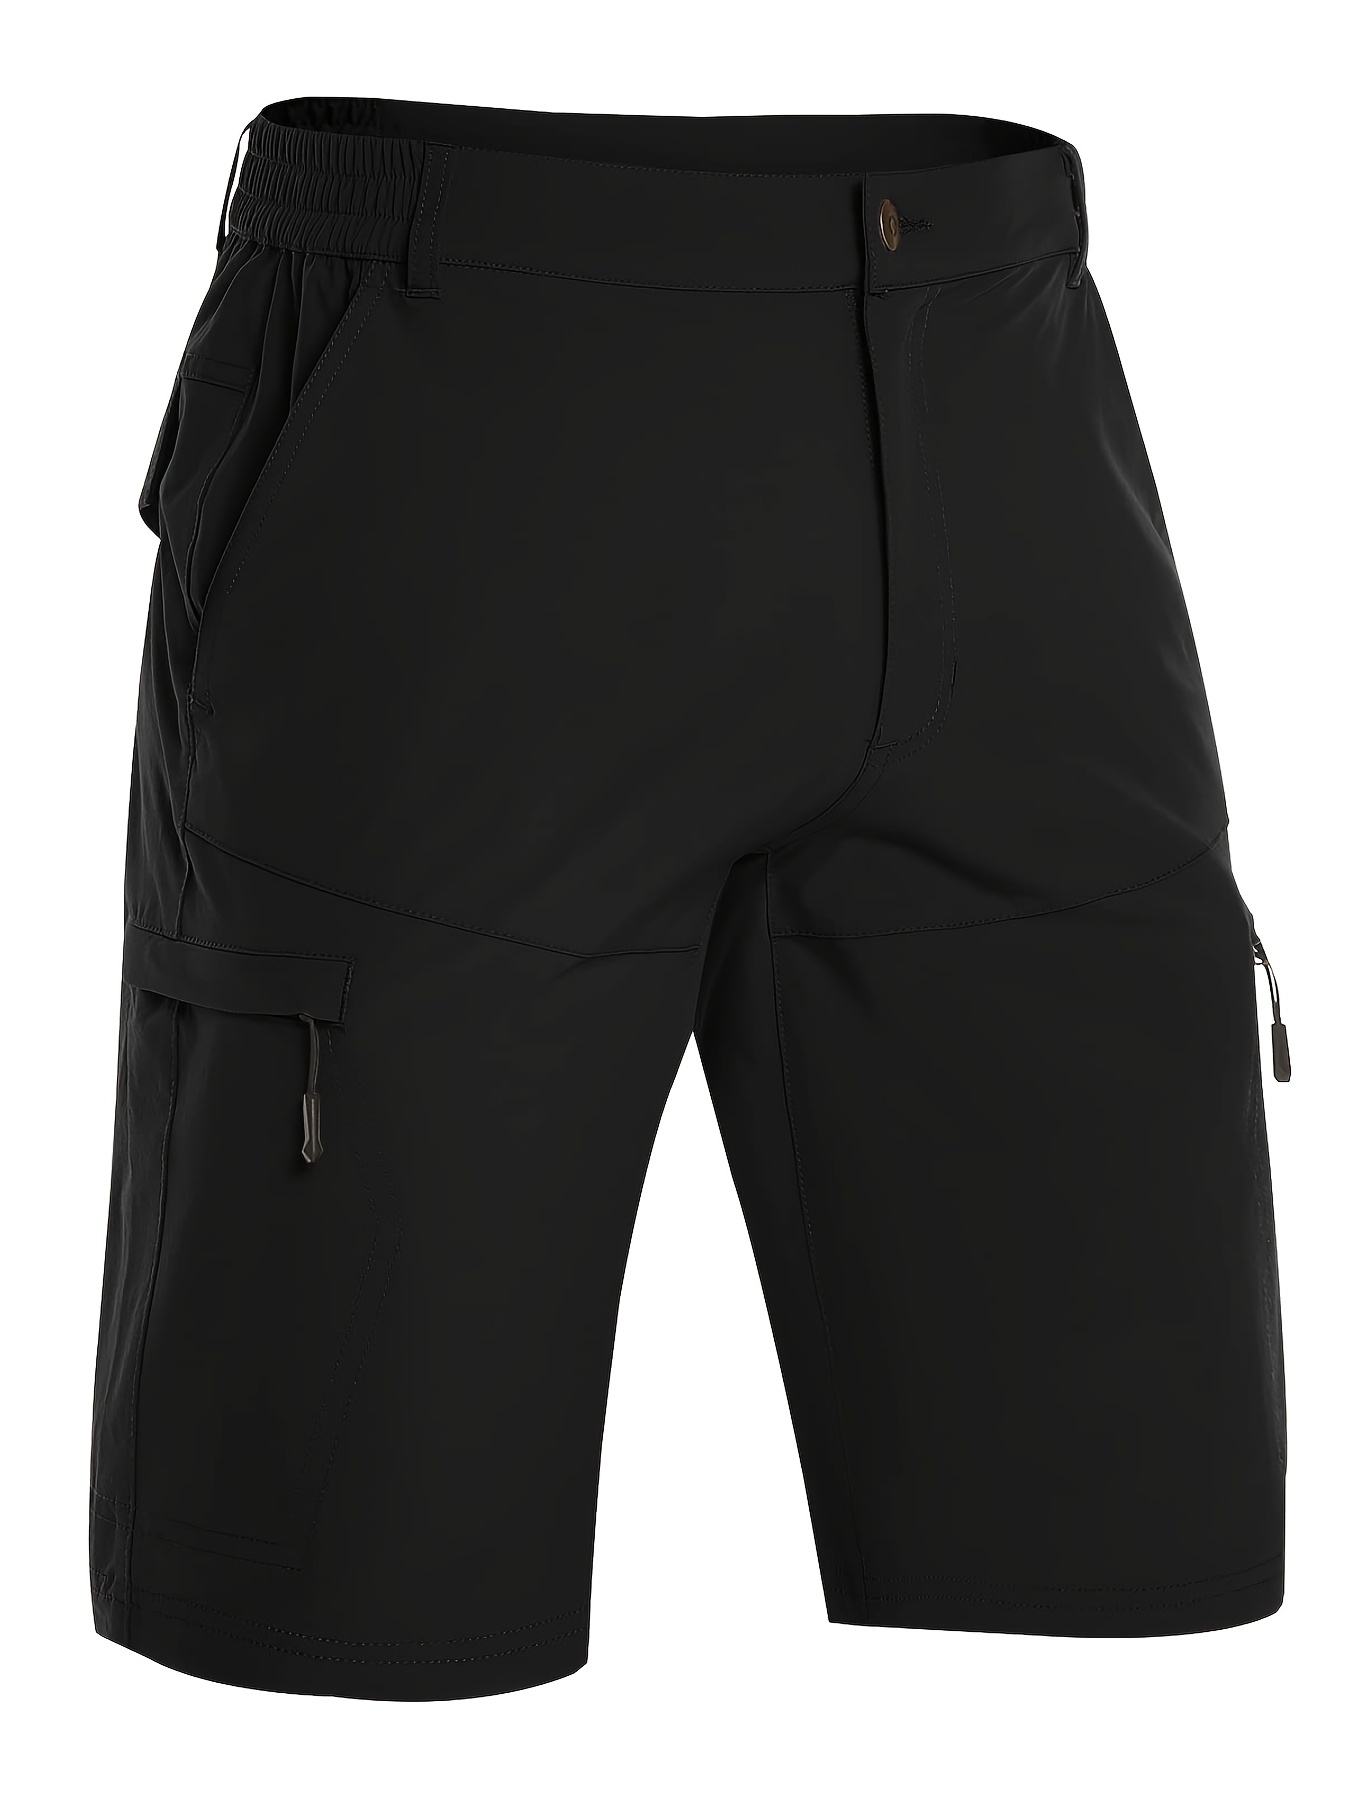 mens stylish multi pocket golf shorts perfect for outdoor adventures